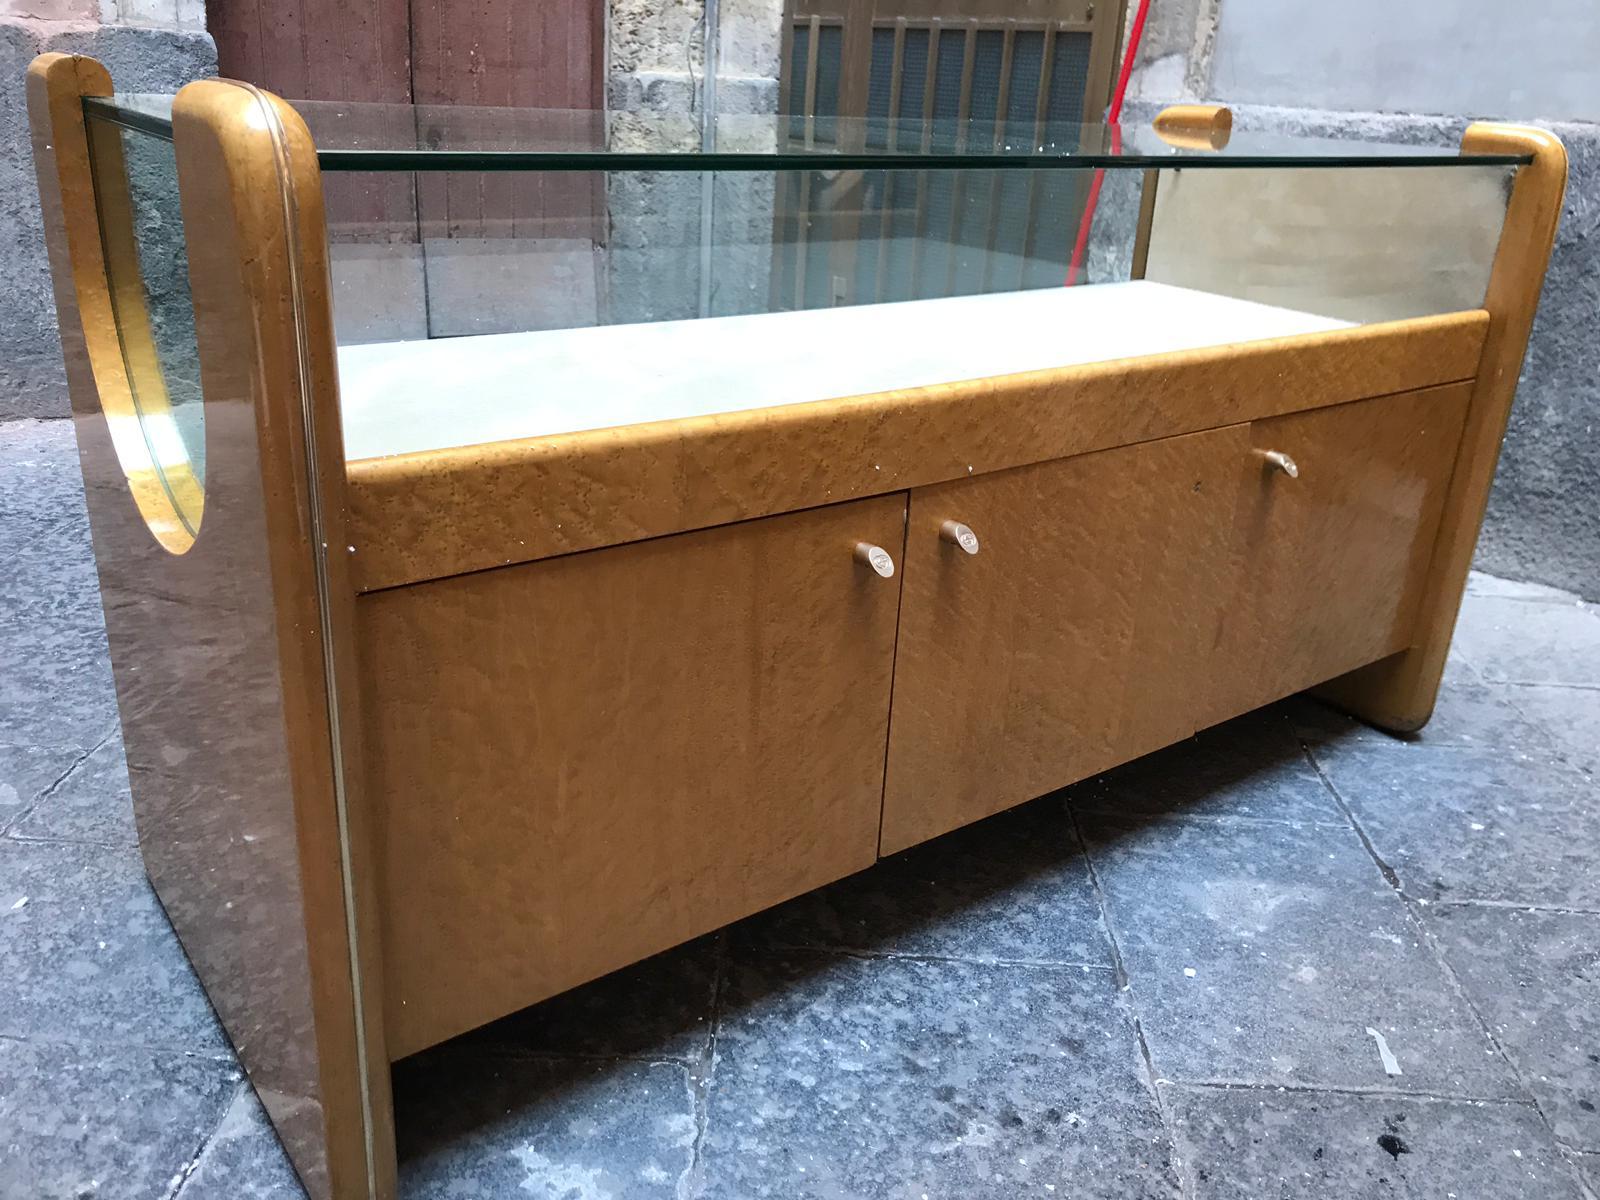 Italian, circa 1980, store fixture in excellent condition. It has a large drawer at the back which slide to enable access to the display. On the front it has three panels. Excellent example of solid craftsmanship and elegant proportions.